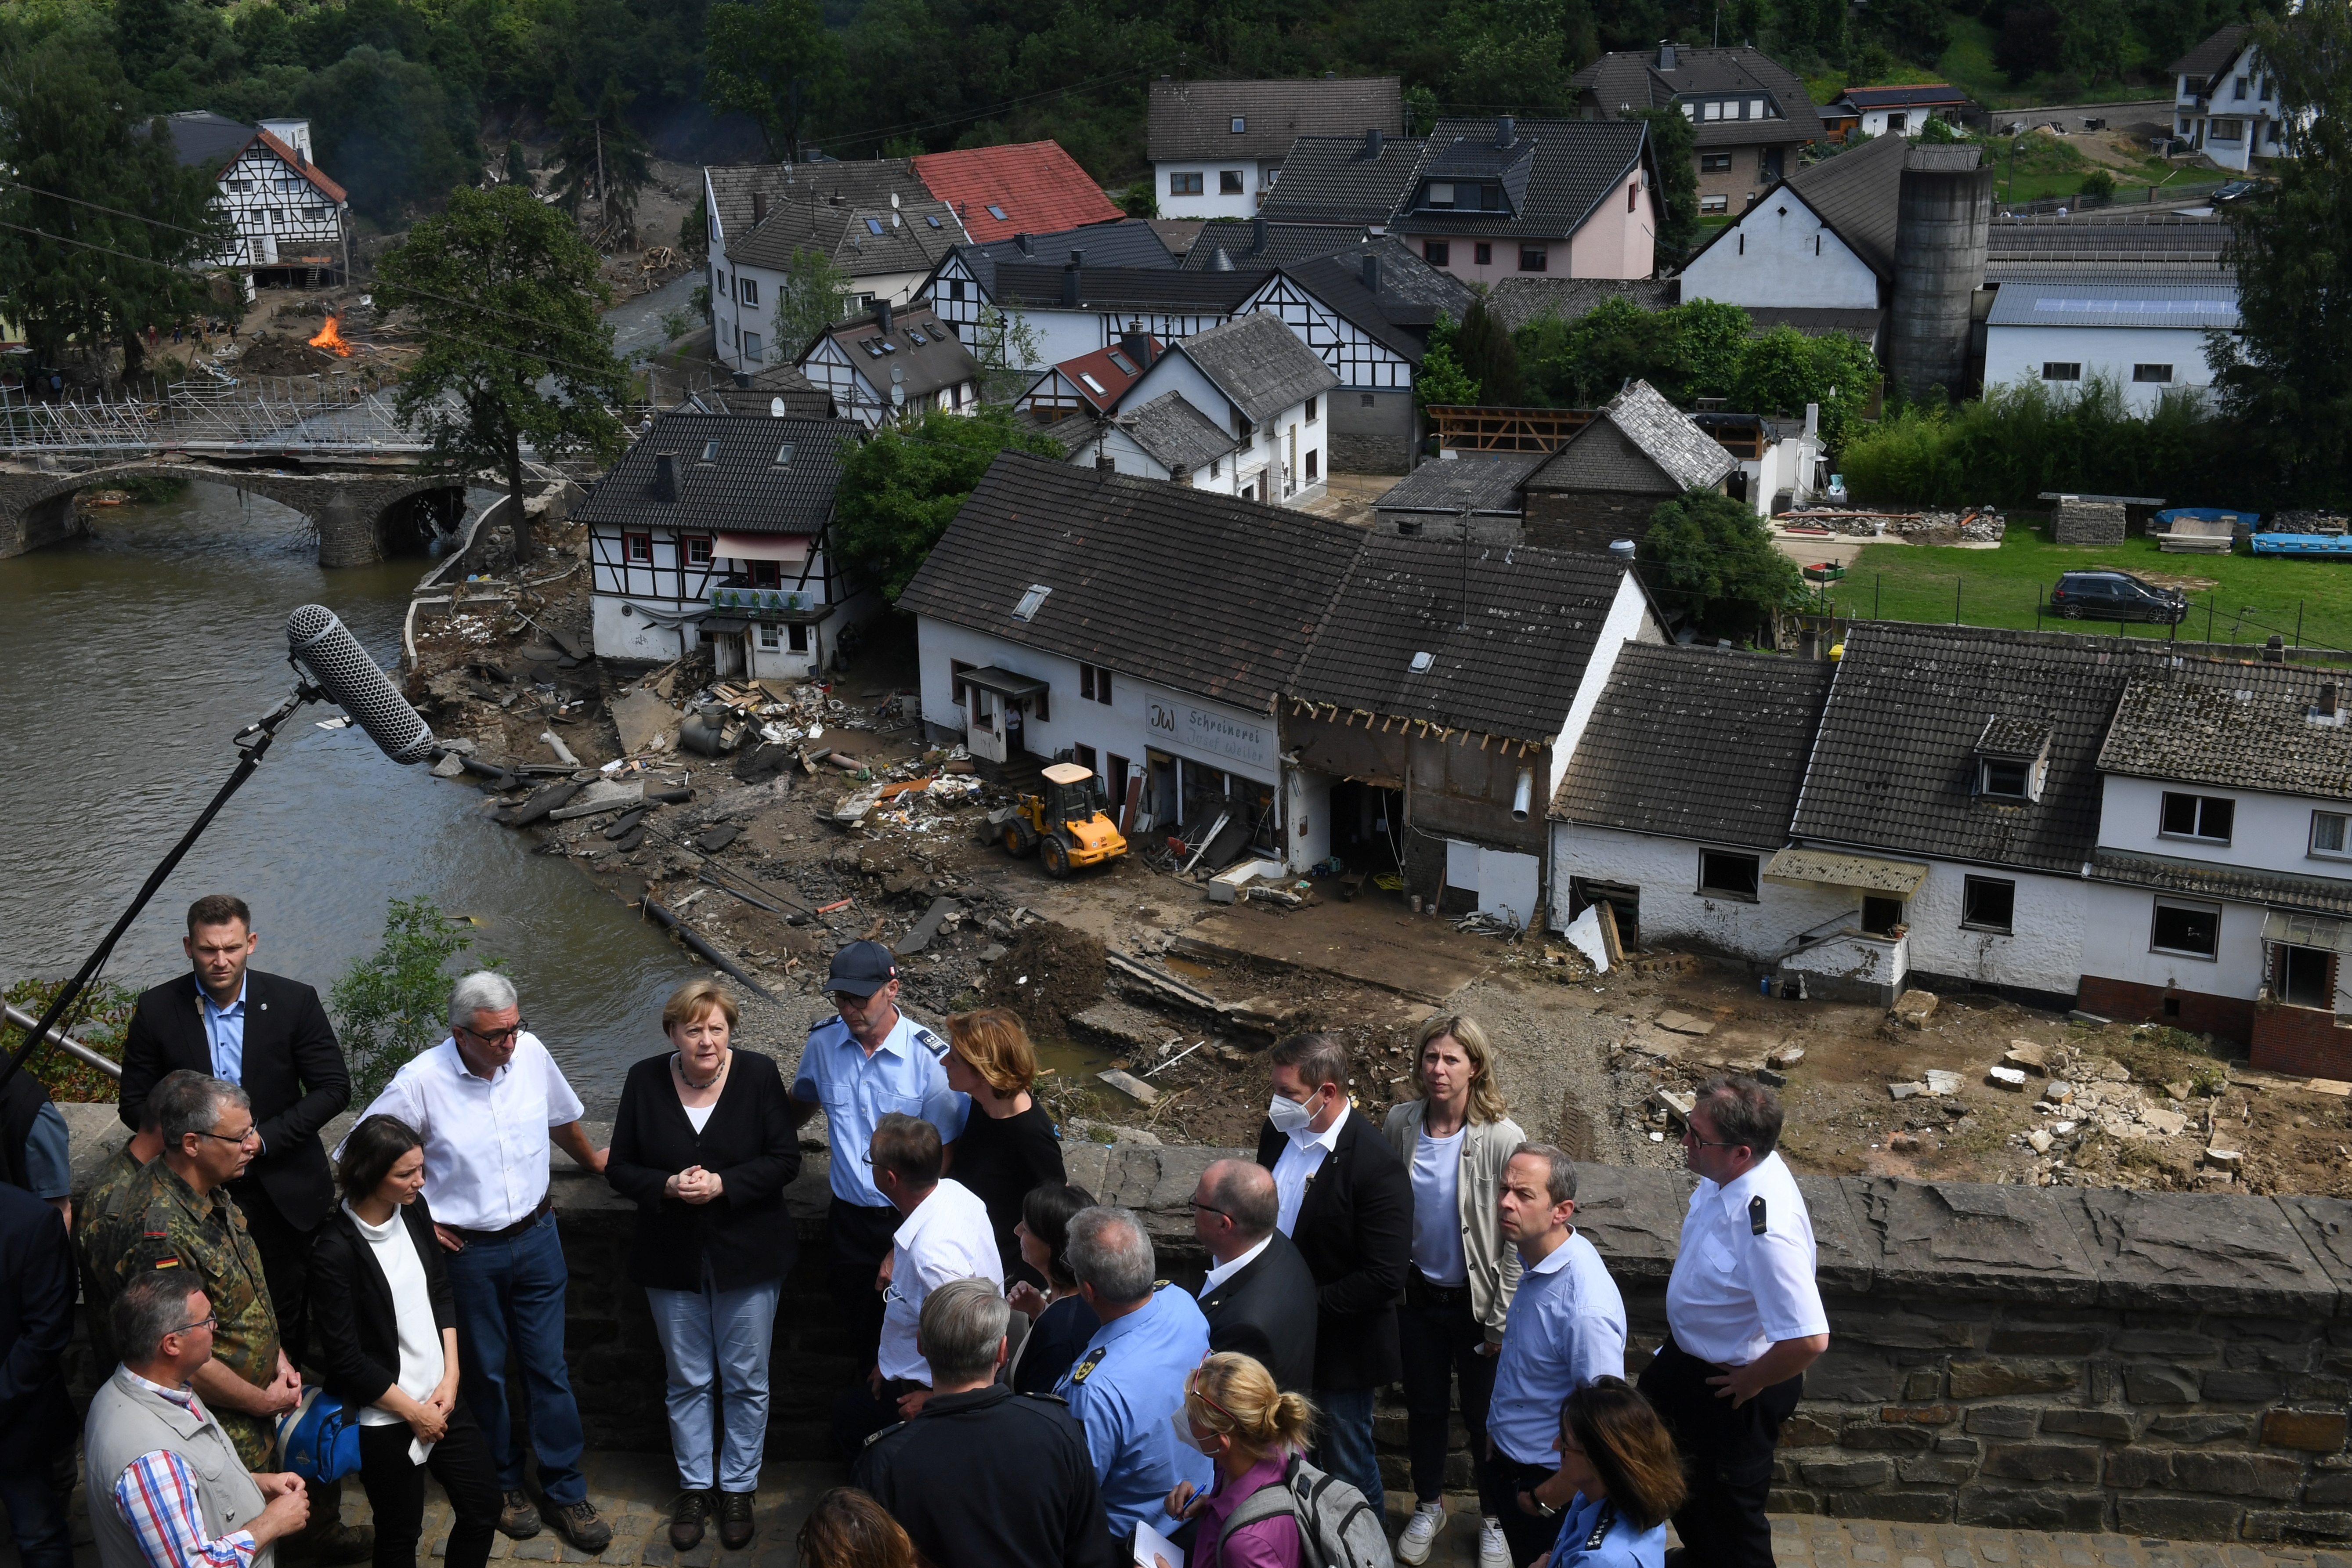 German Chancellor Angela Merkel and Rhineland-Palatinate State Premier Malu Dreyer speak to people as they stand on a bridge during their visit in the flood-ravaged areas, in Schuld near Bad Neuenahr-Ahrweiler, Rhineland-Palatinate state, Germany, July 18, 2021. Christof Stache/Pool via REUTERS